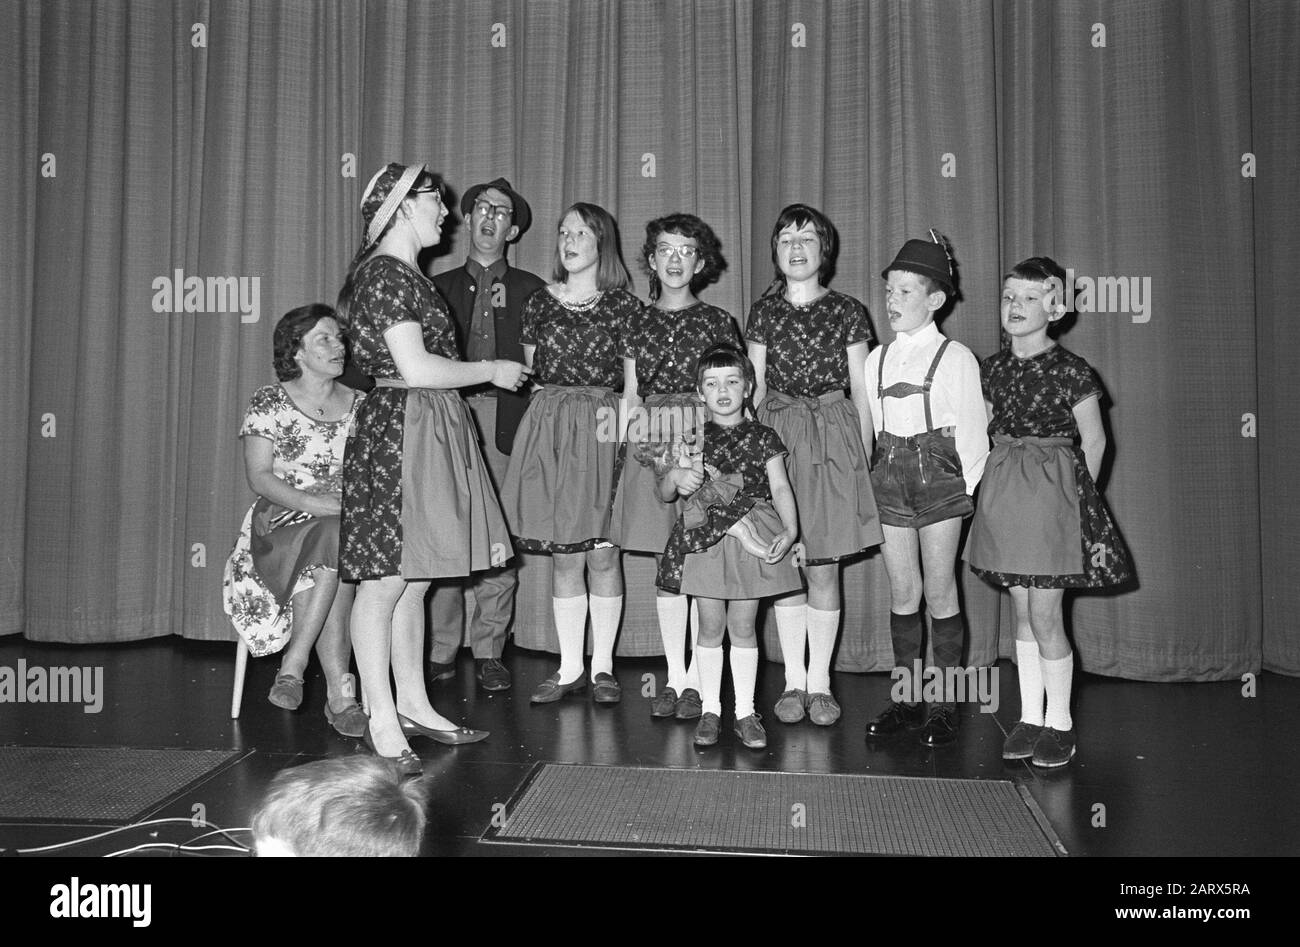 The Sound of Music, contest for families in cinema Du Midi in Amsterdam.  Winner the family Van Dijk Date: 29 January 1966 Location: Amsterdam,  Noord-Holland Keywords: families, films, musicals, competitions Institution  name: